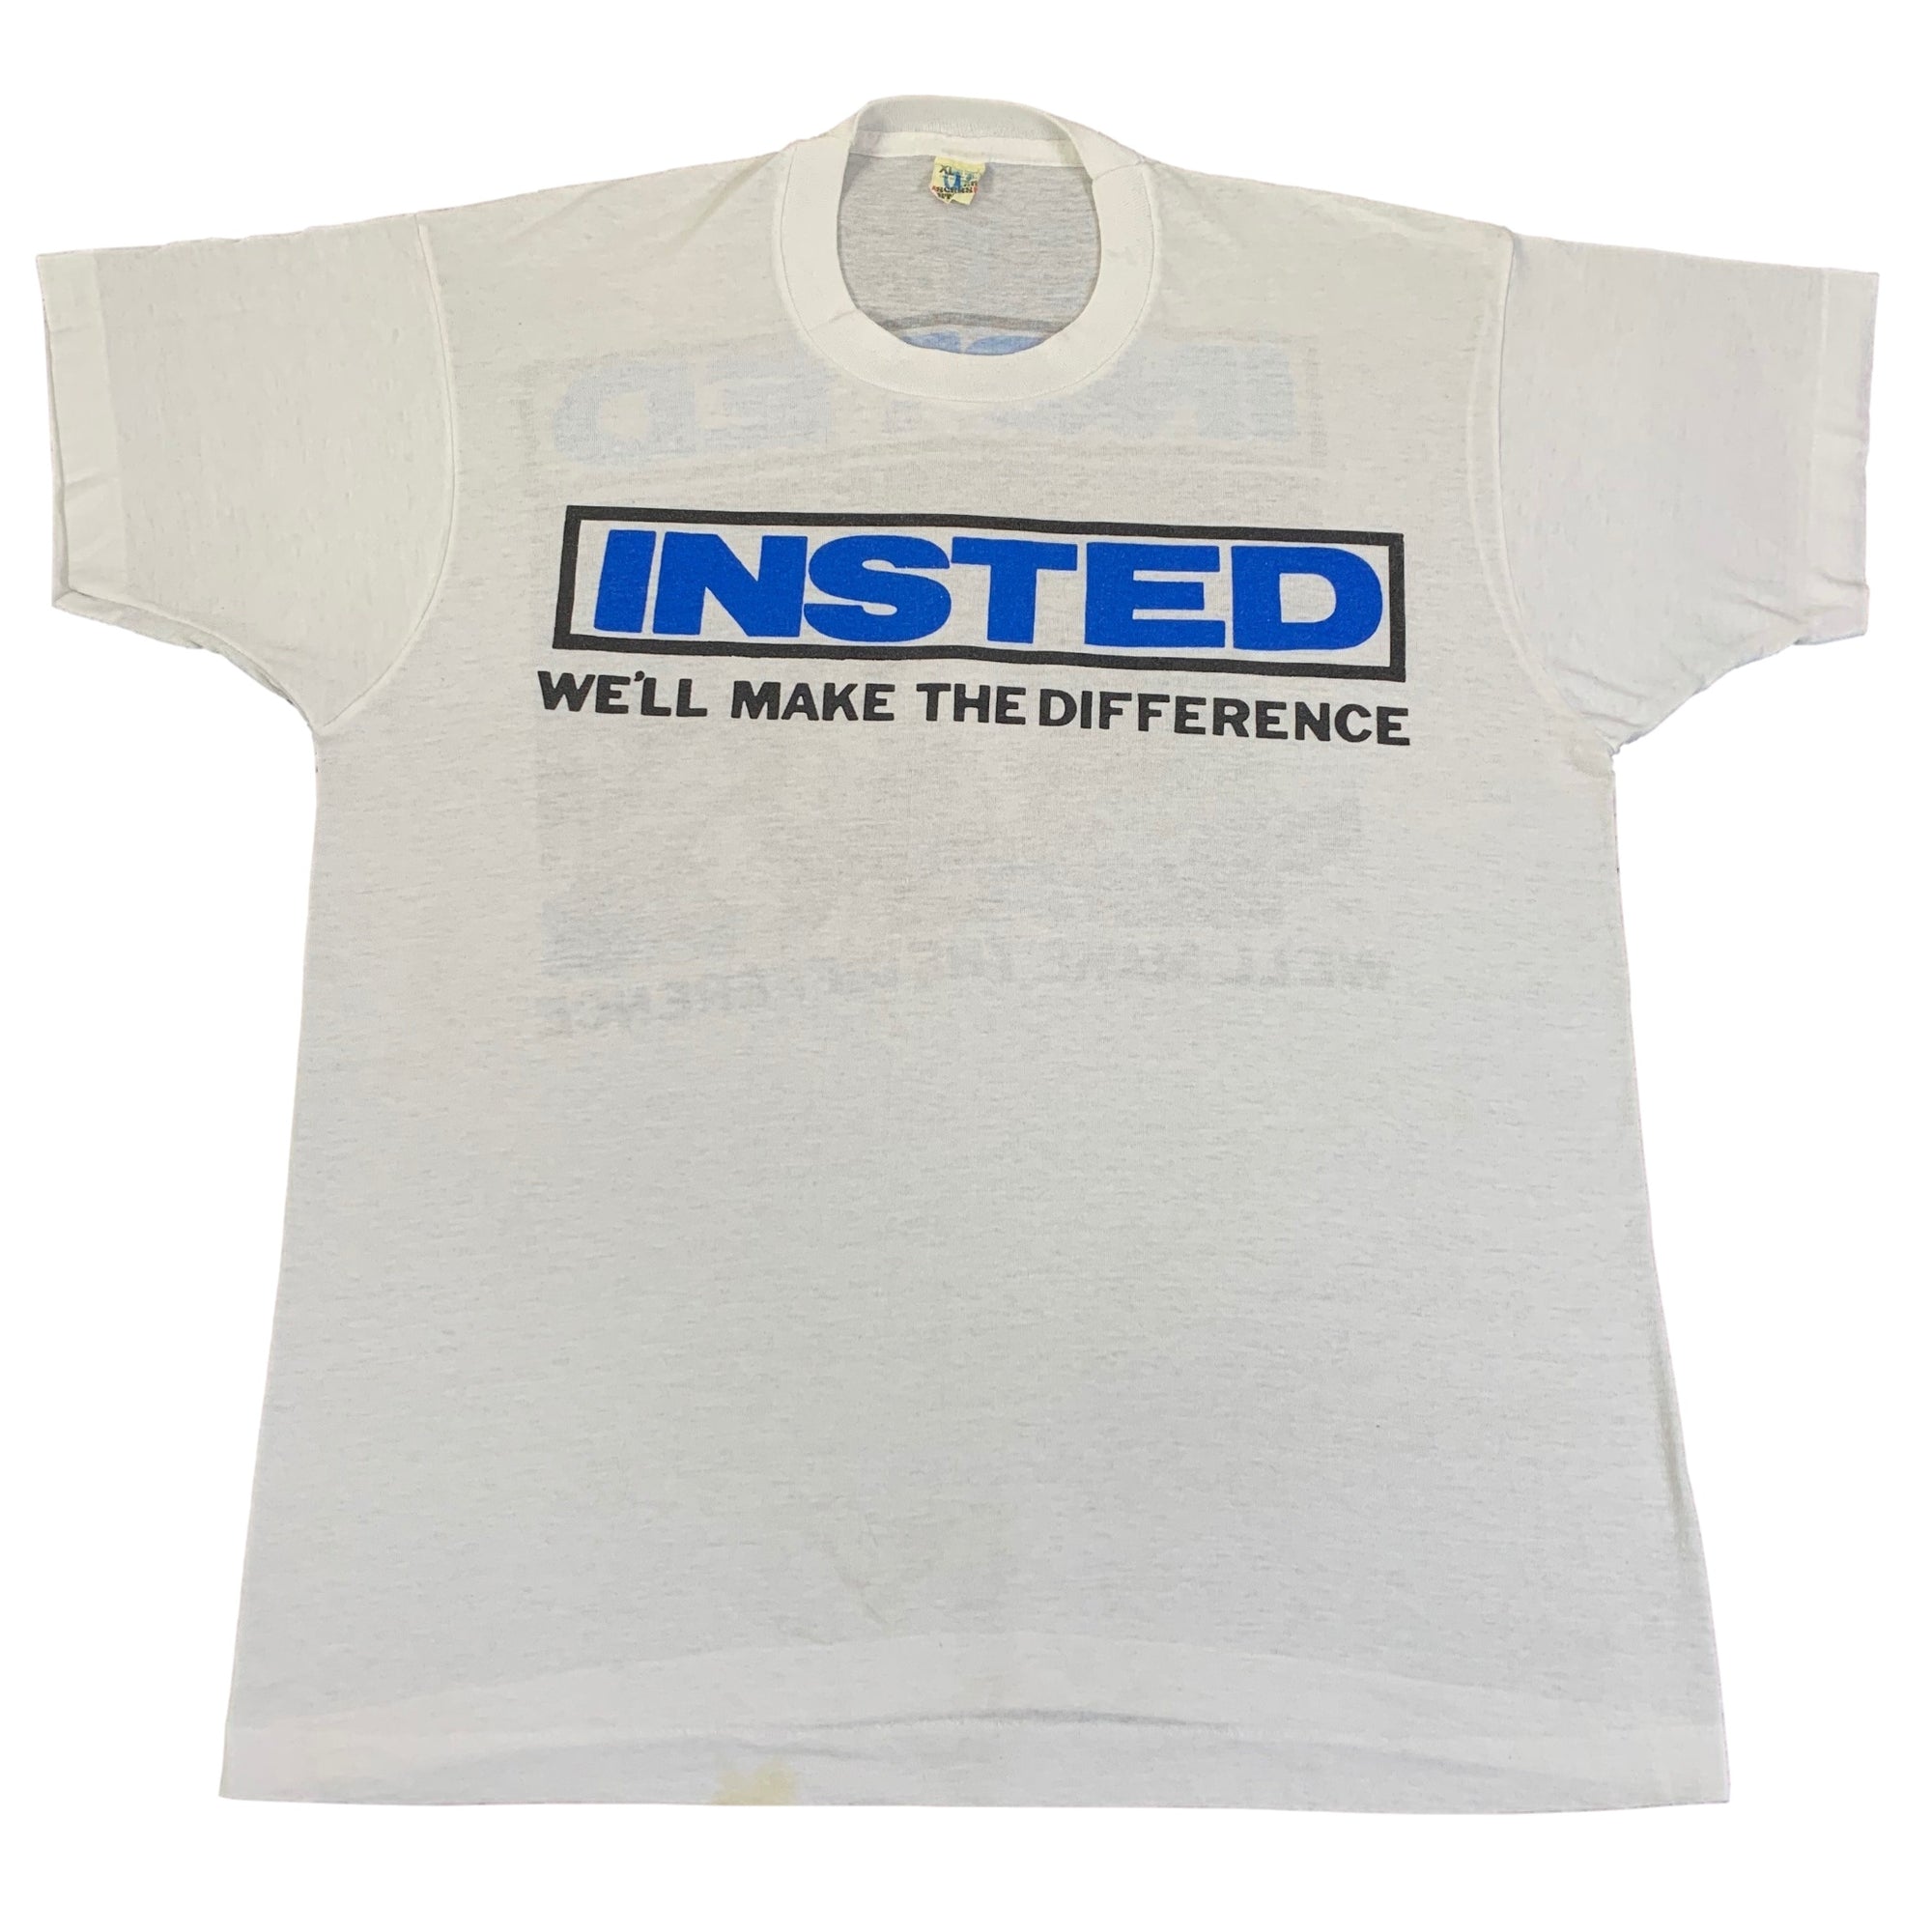 Vintage Insted "We'll Make The Difference" T-Shirt - jointcustodydc